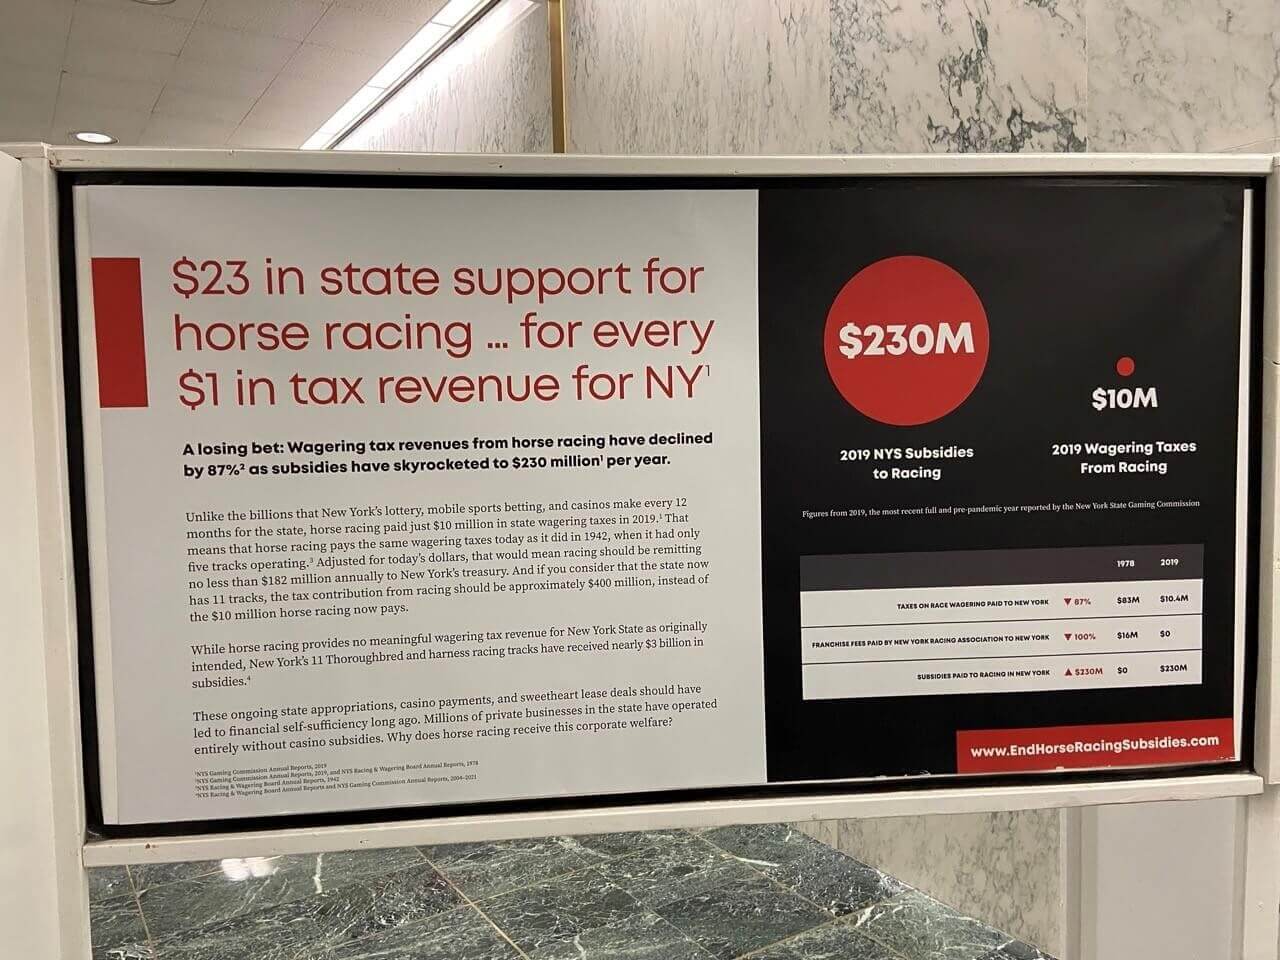 Coalition to End Horse Racing Subsidies panel about how there are $23 in state support wastefully used for horse racing for every $1 in tax revenue for New York